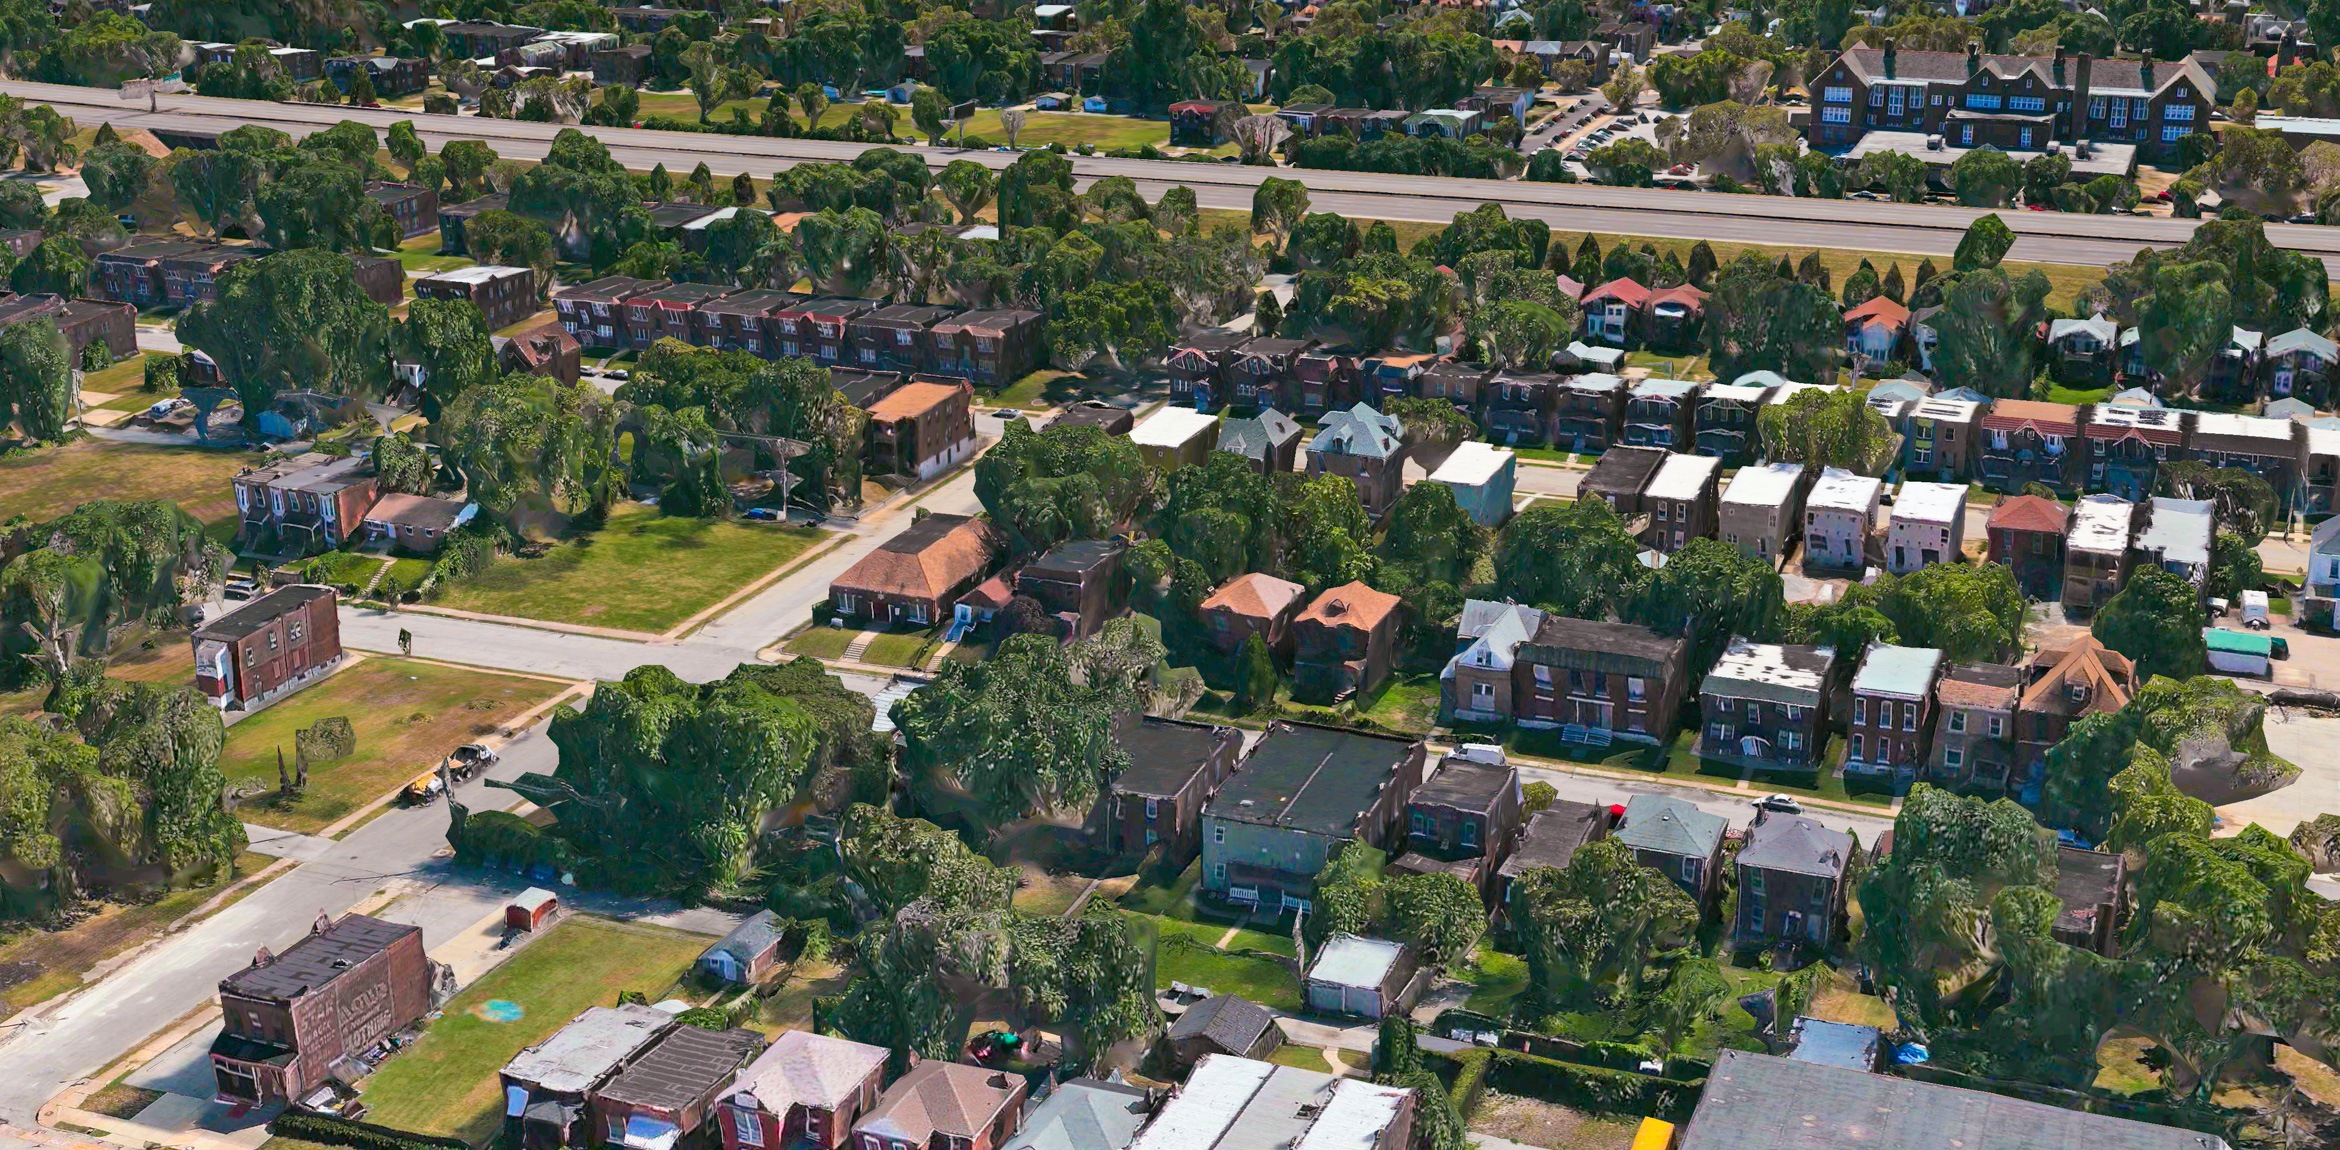 An aerial view of neighborhoods of St. Louis.